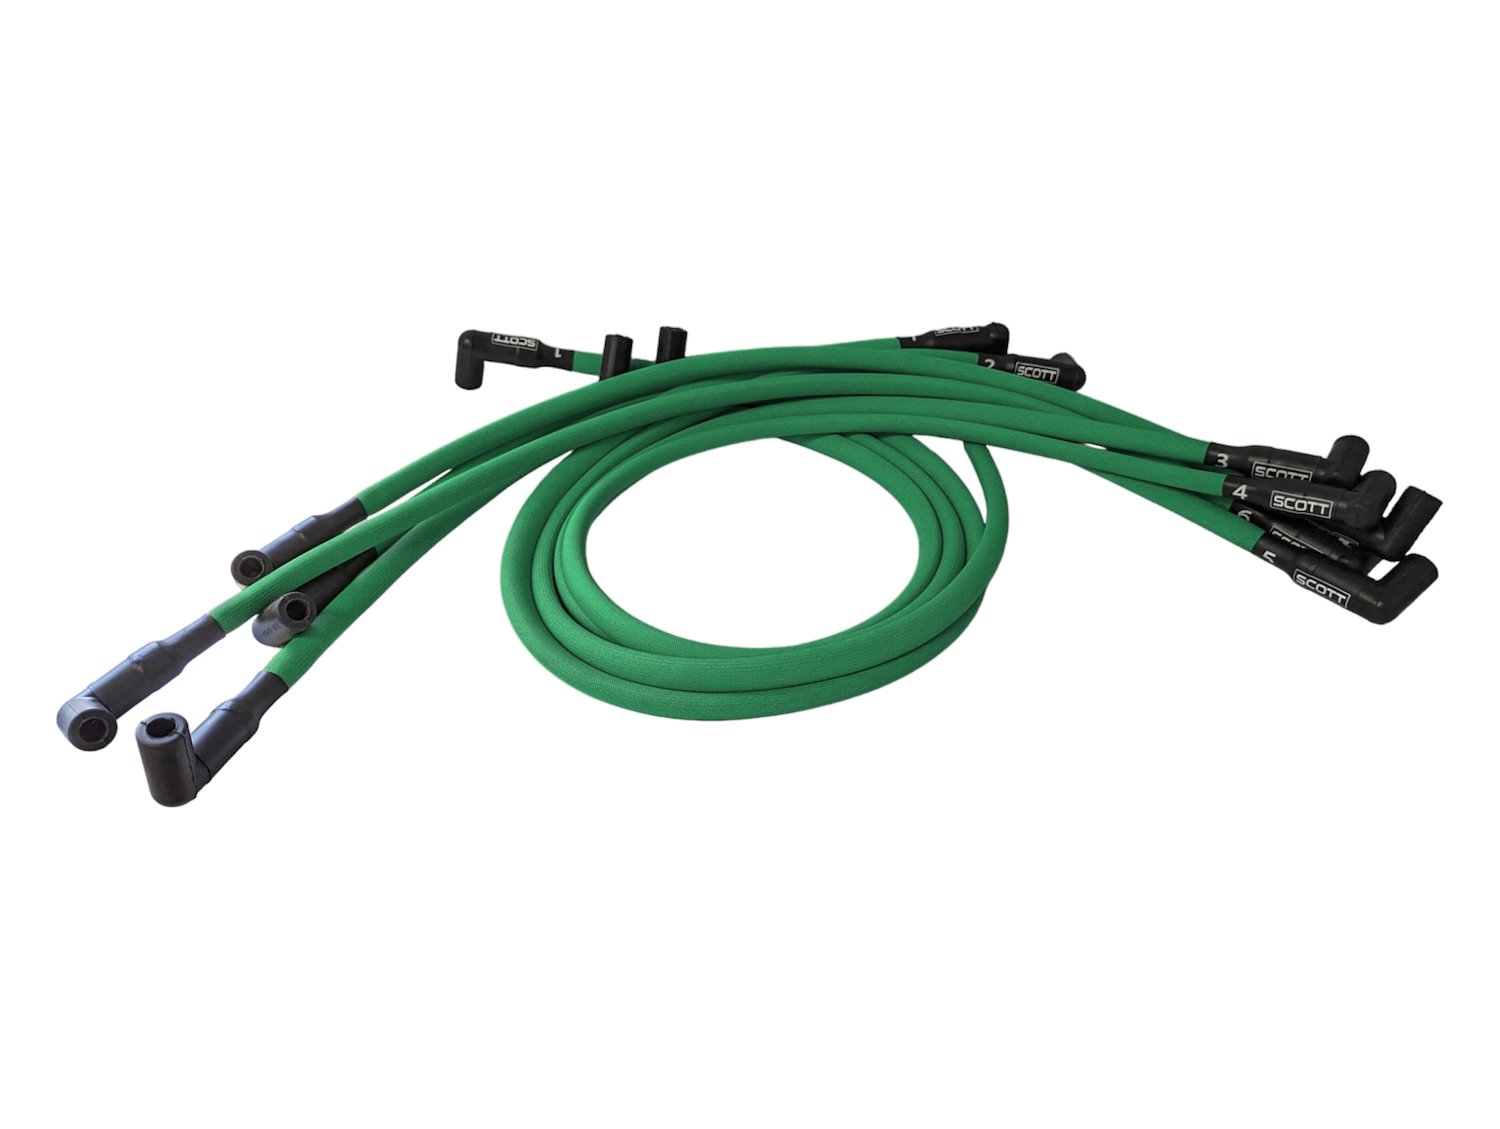 SPW-PS-530-4 High-Performance Fiberglass-Oversleeved Spark Plug Wire Set for Big Block Ford Dragster, Under Header [Green]